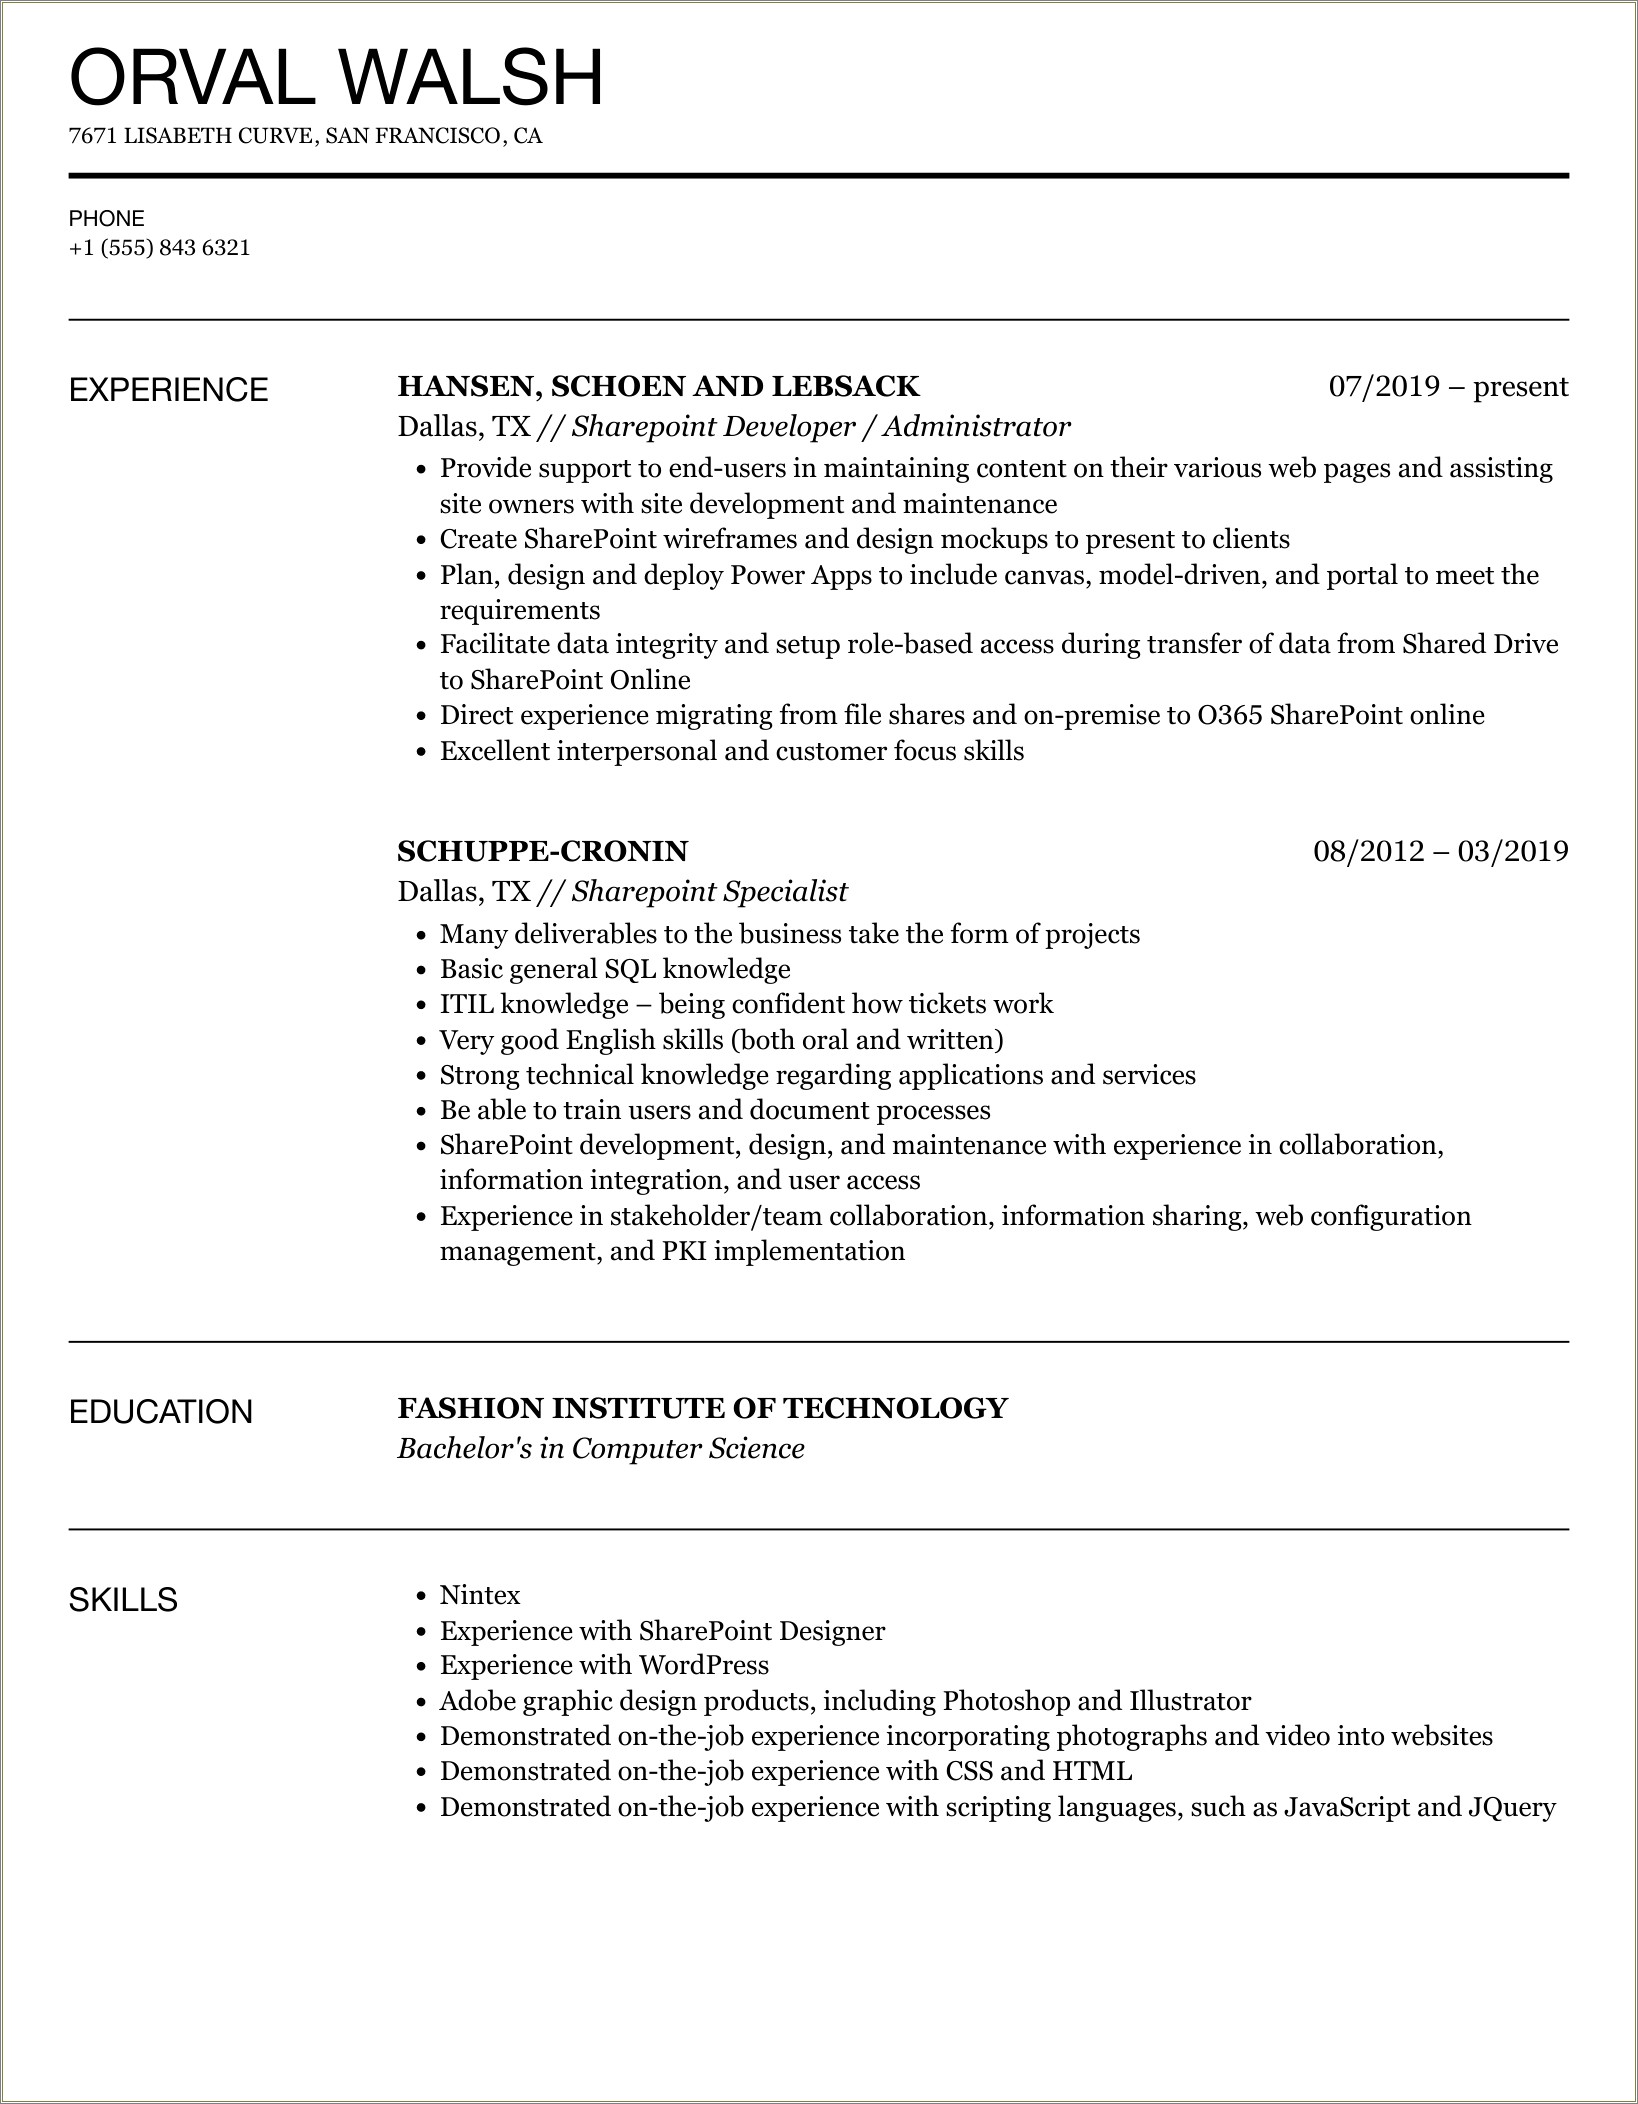 Sharepoint Resume With 6 Years Experiance